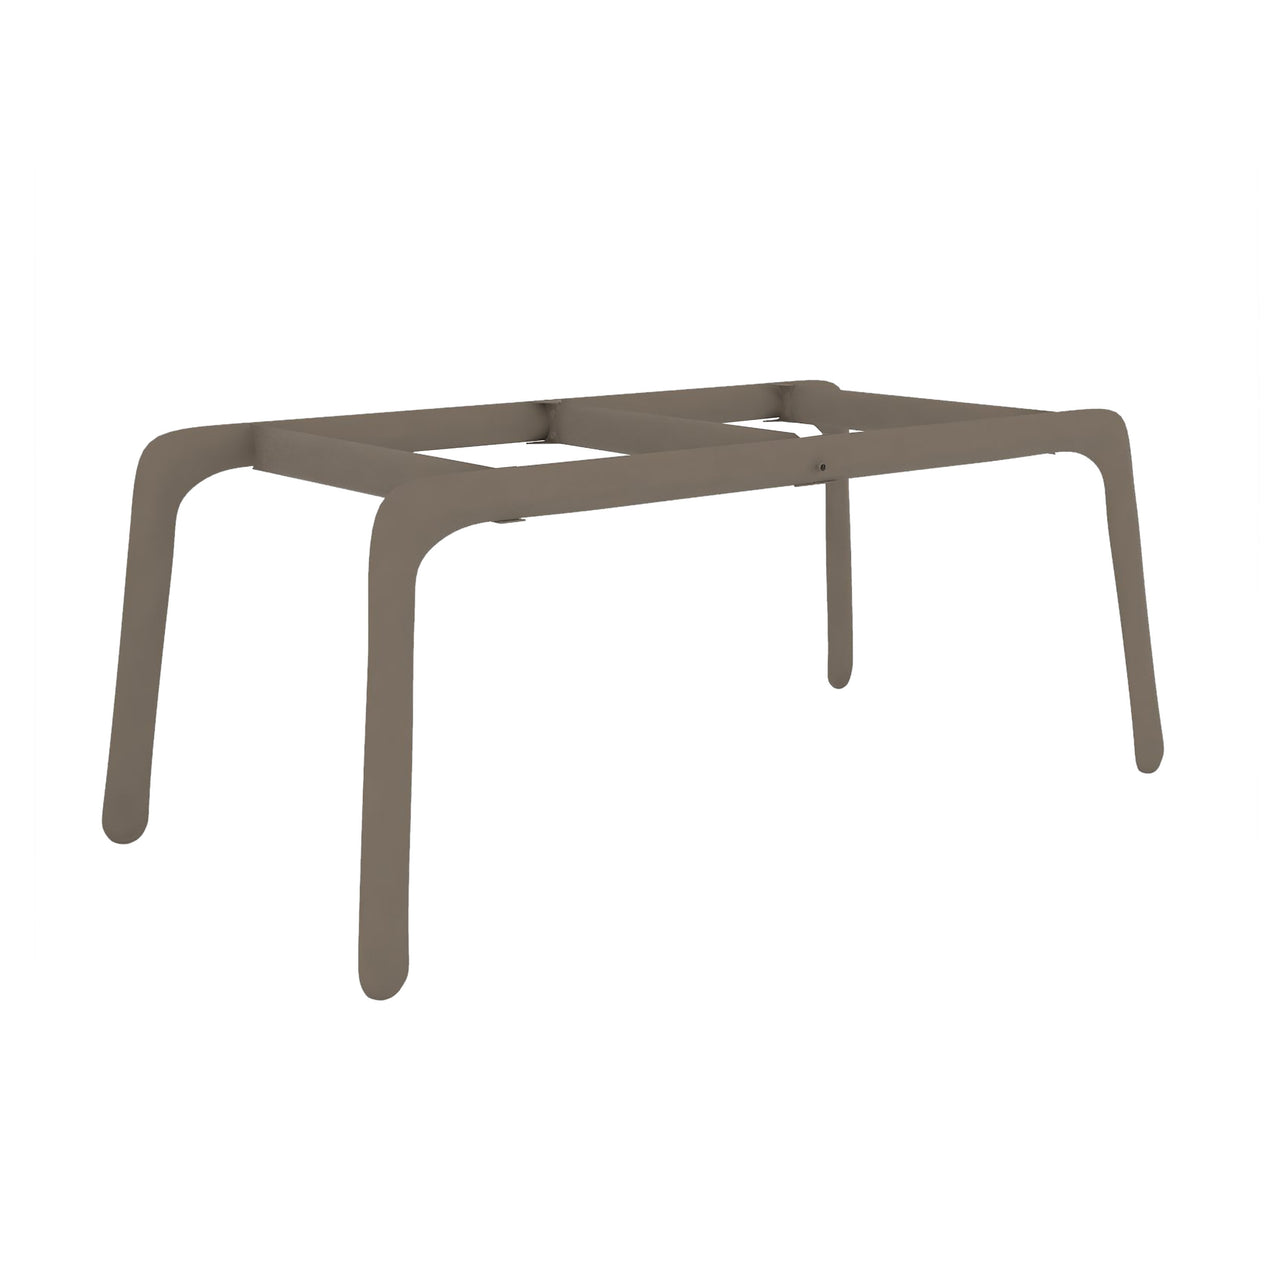 Most Table Base: Beige Grey Carbon Steel